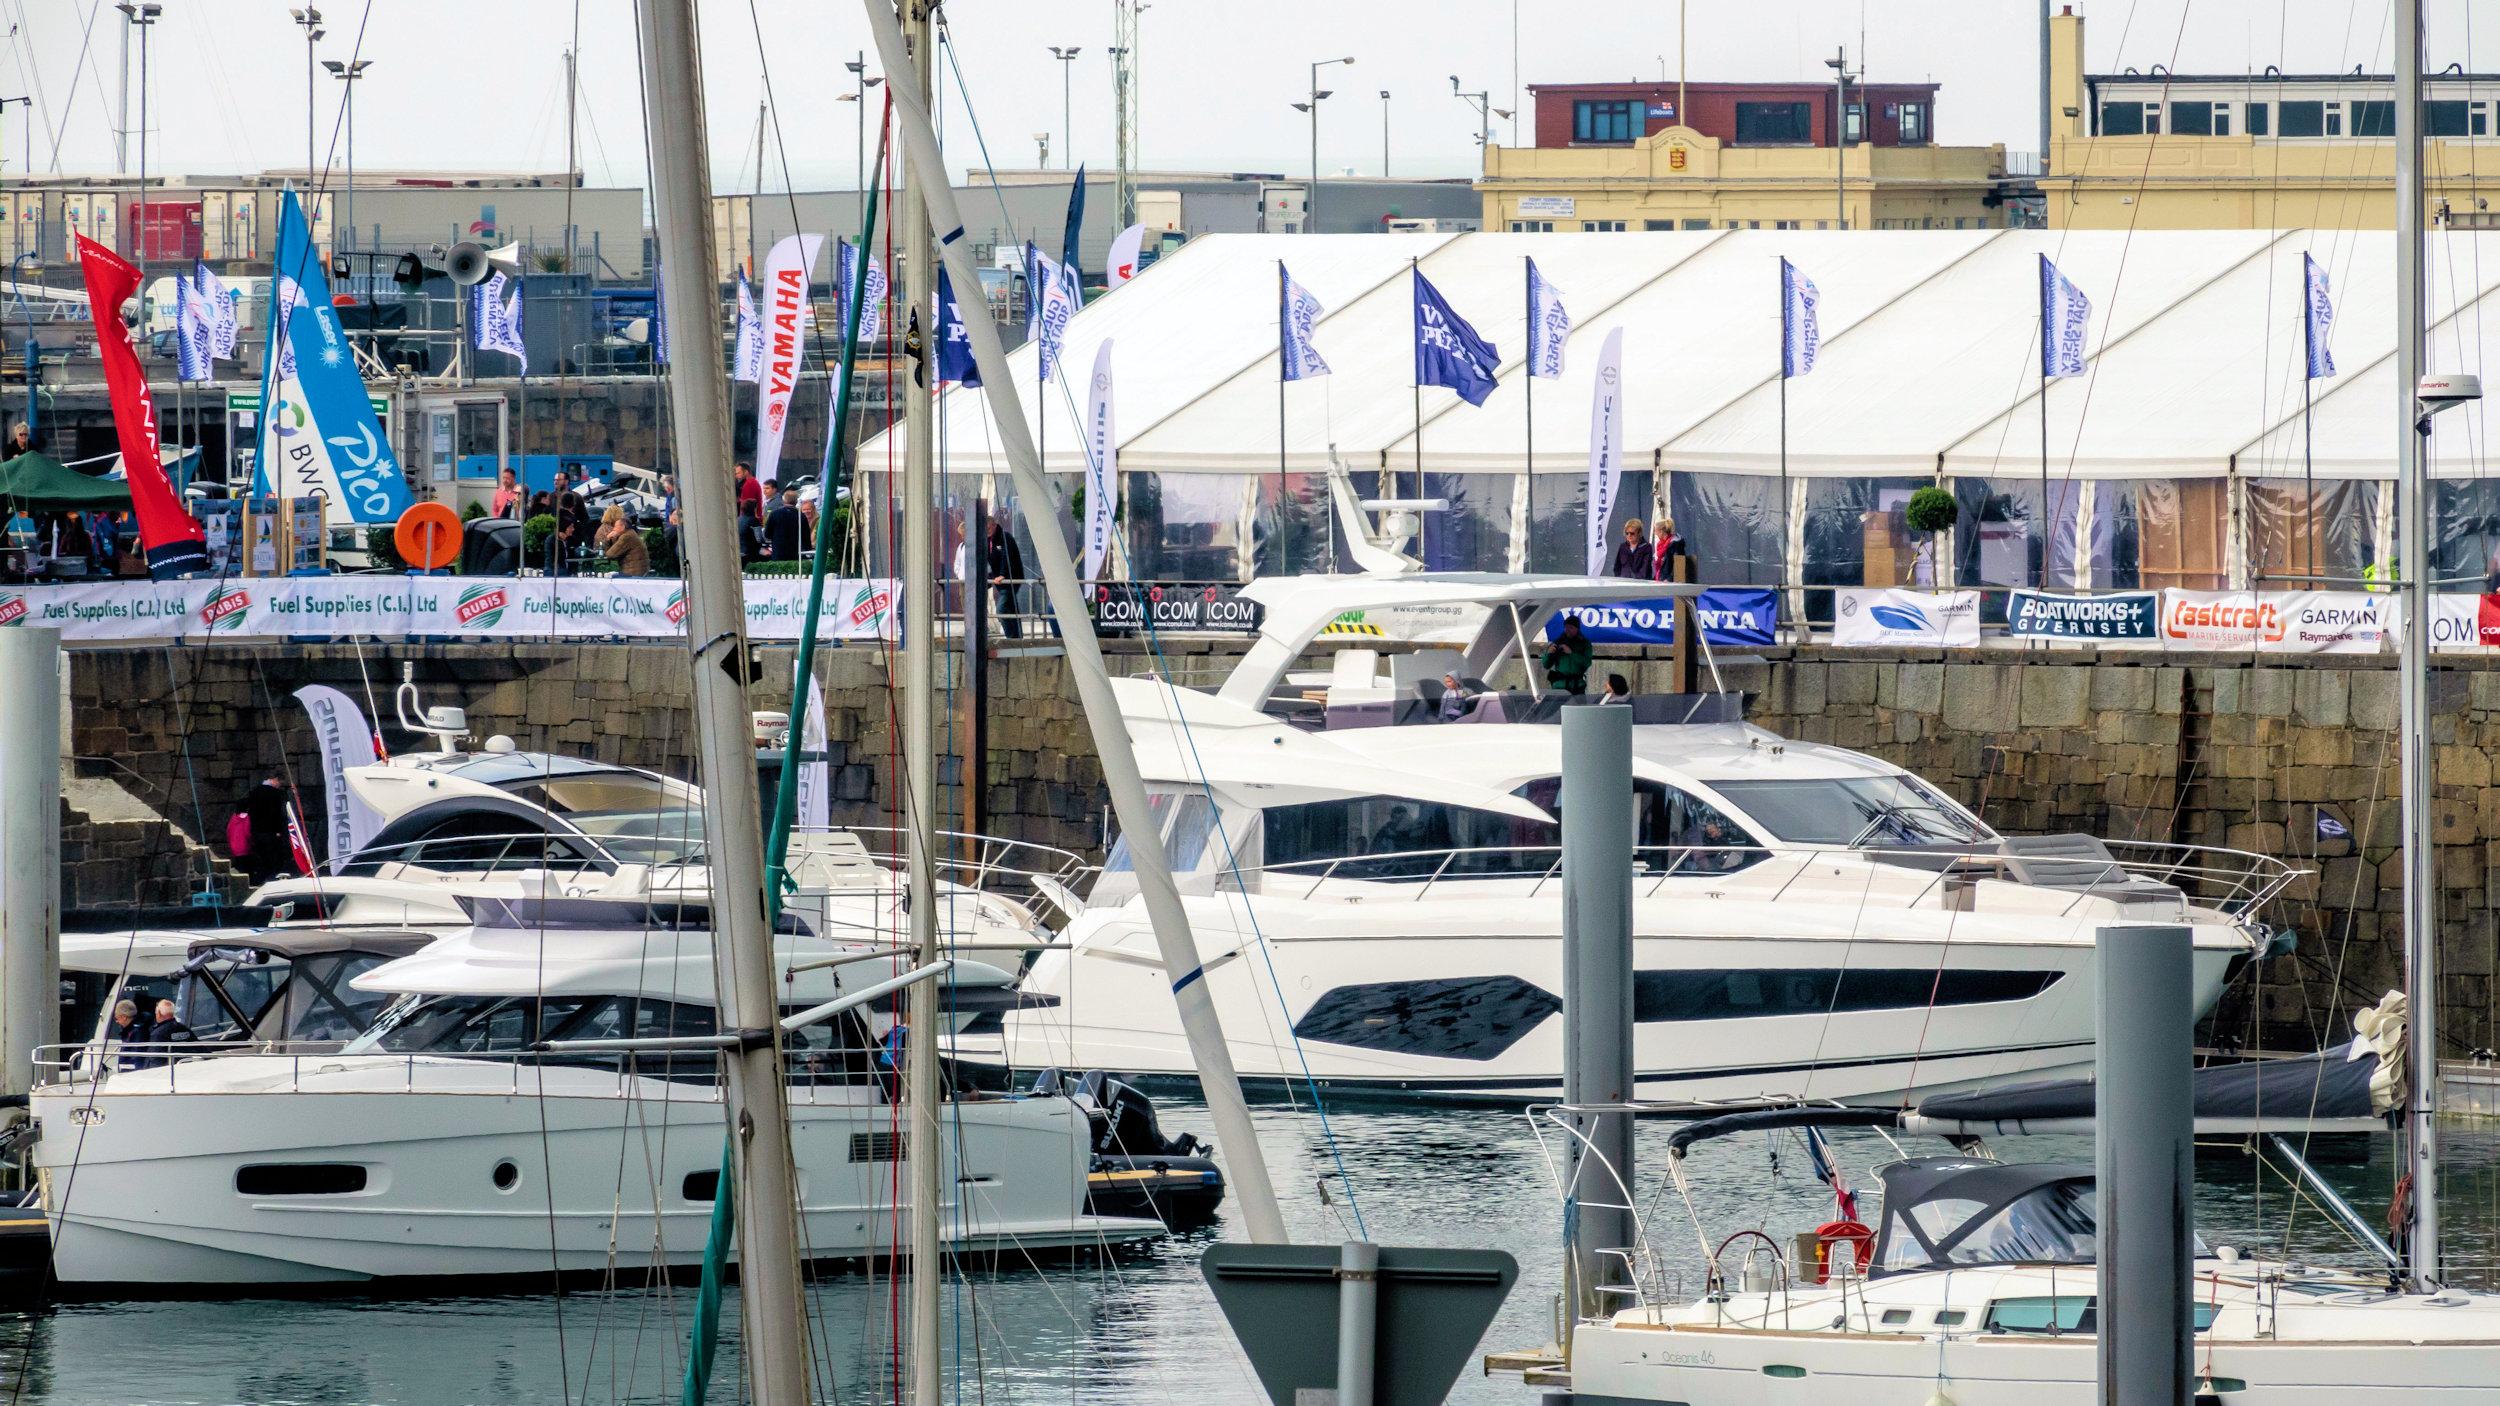 Guernsey Boat Show 01 16-9